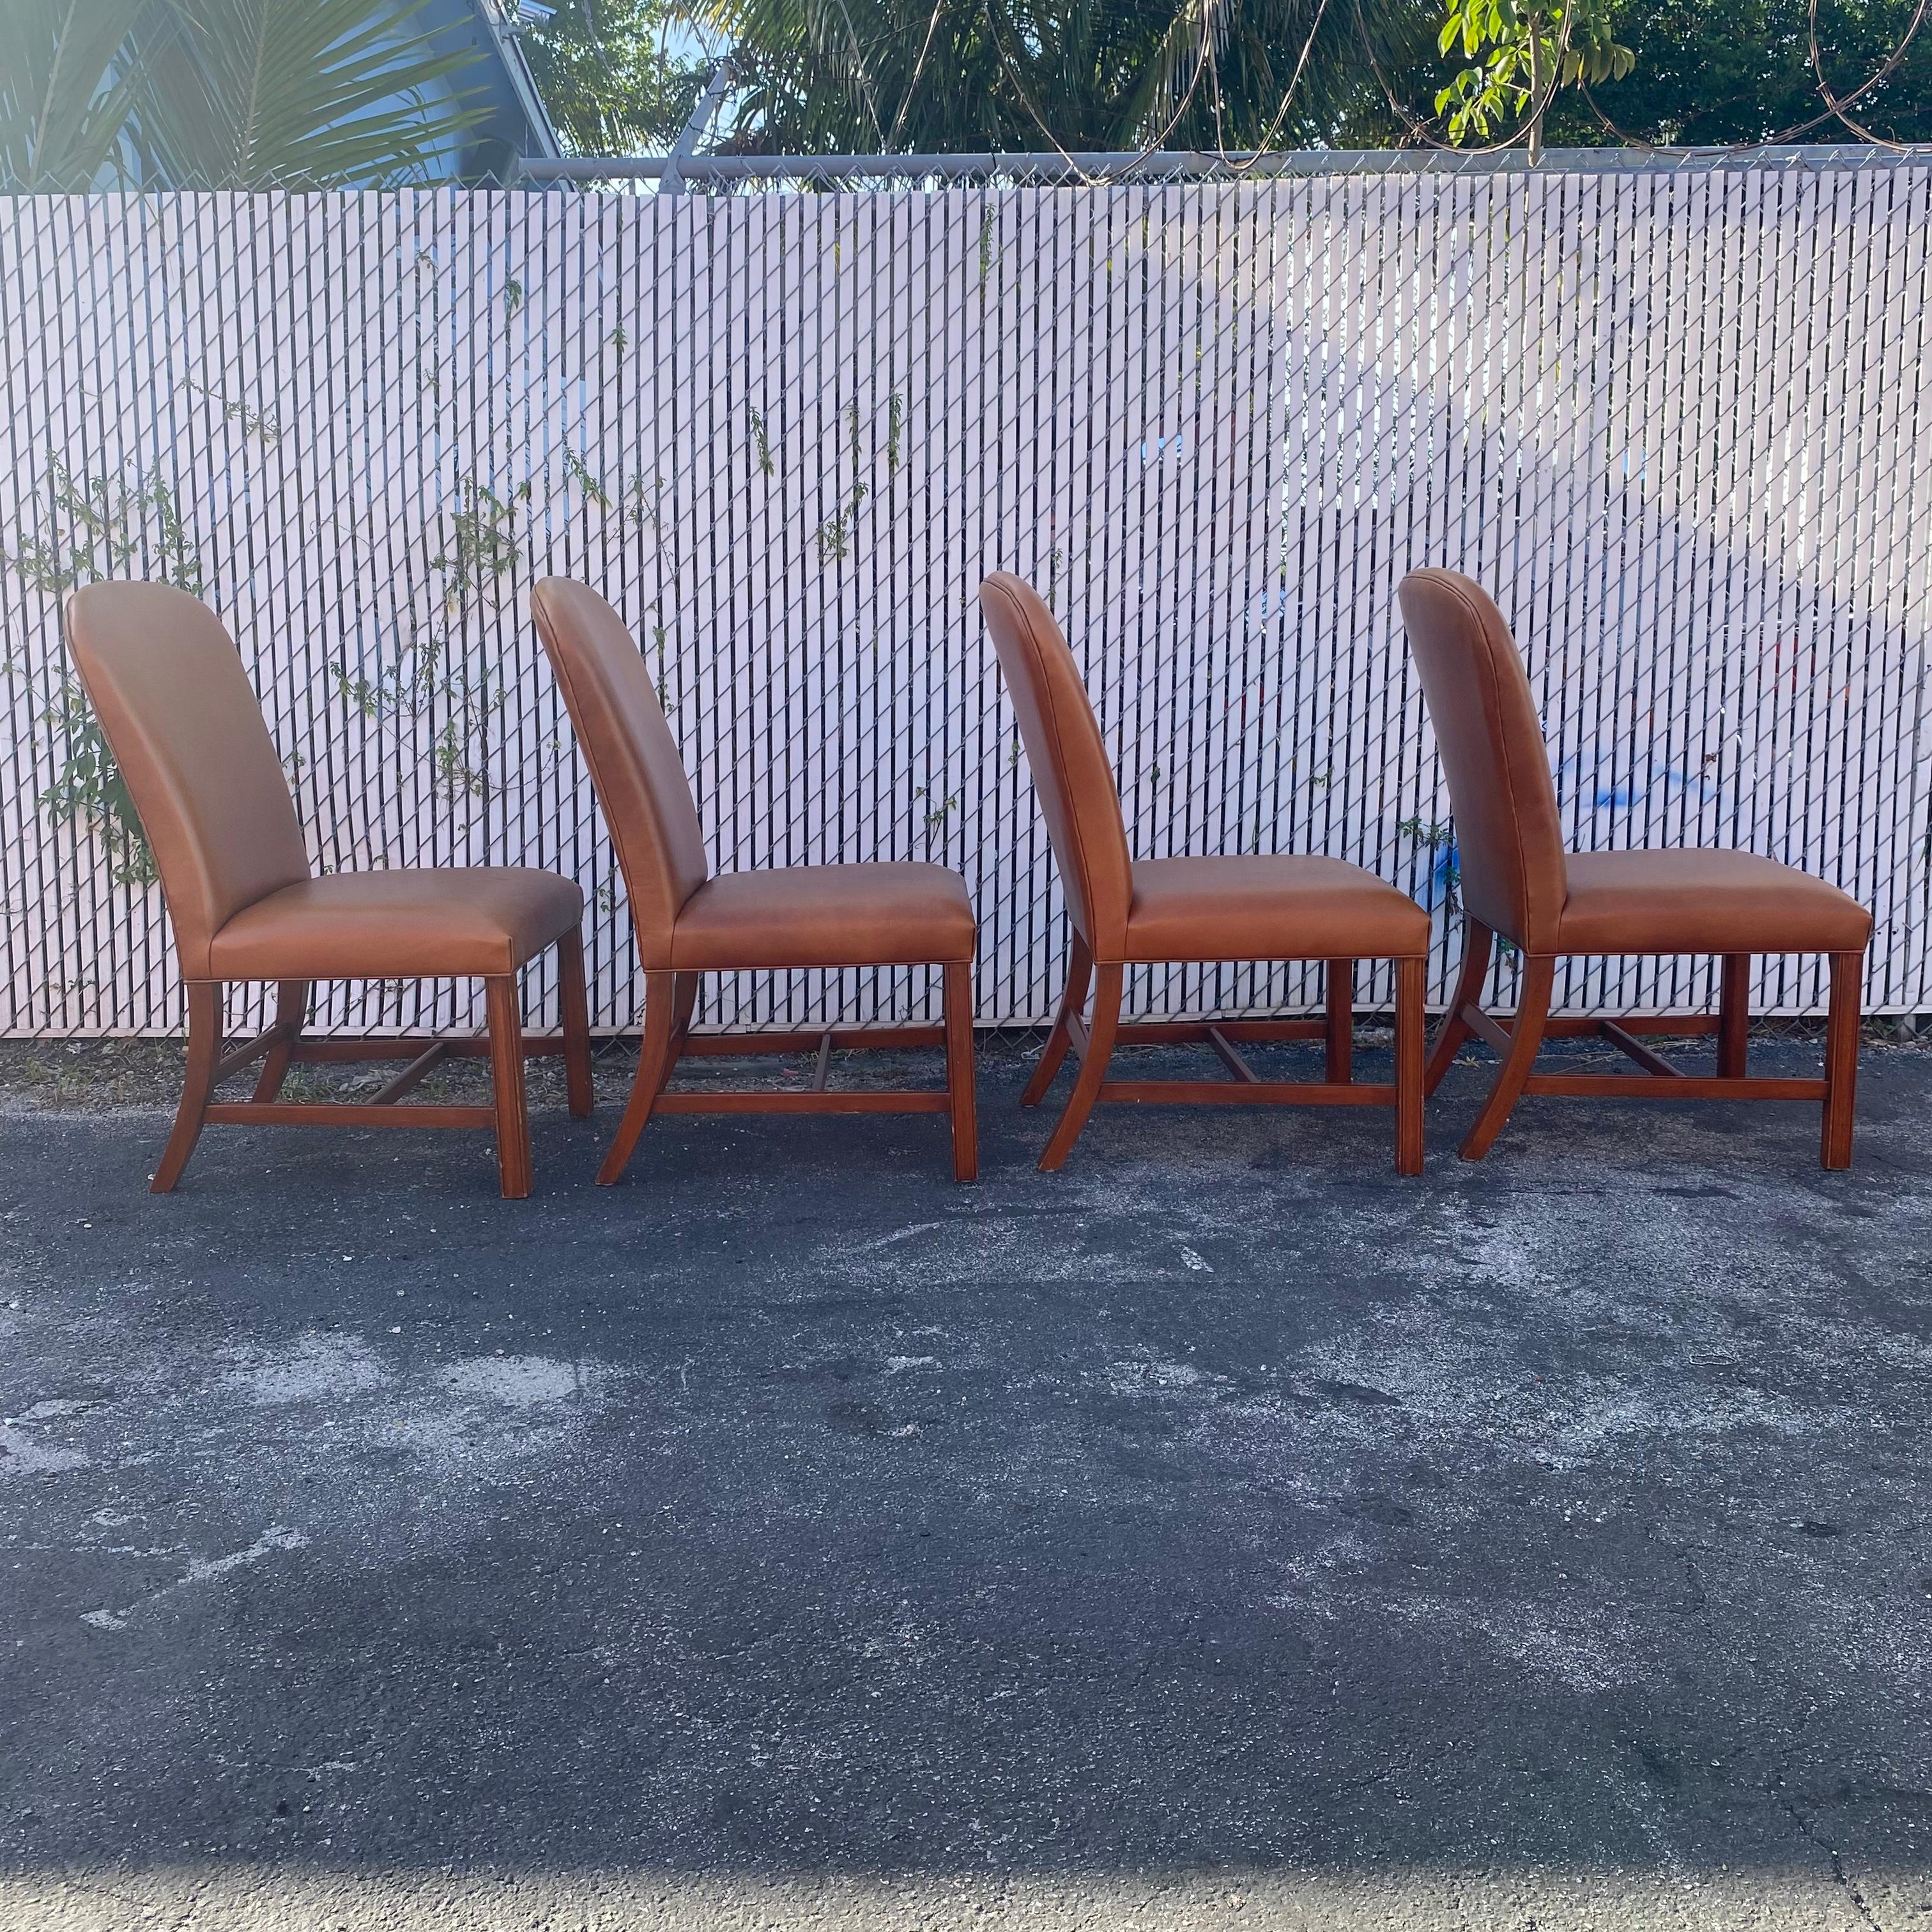 2000s Ralph Lauren Saddle Leather Dining Chairs, Set of 4 In Good Condition For Sale In Fort Lauderdale, FL